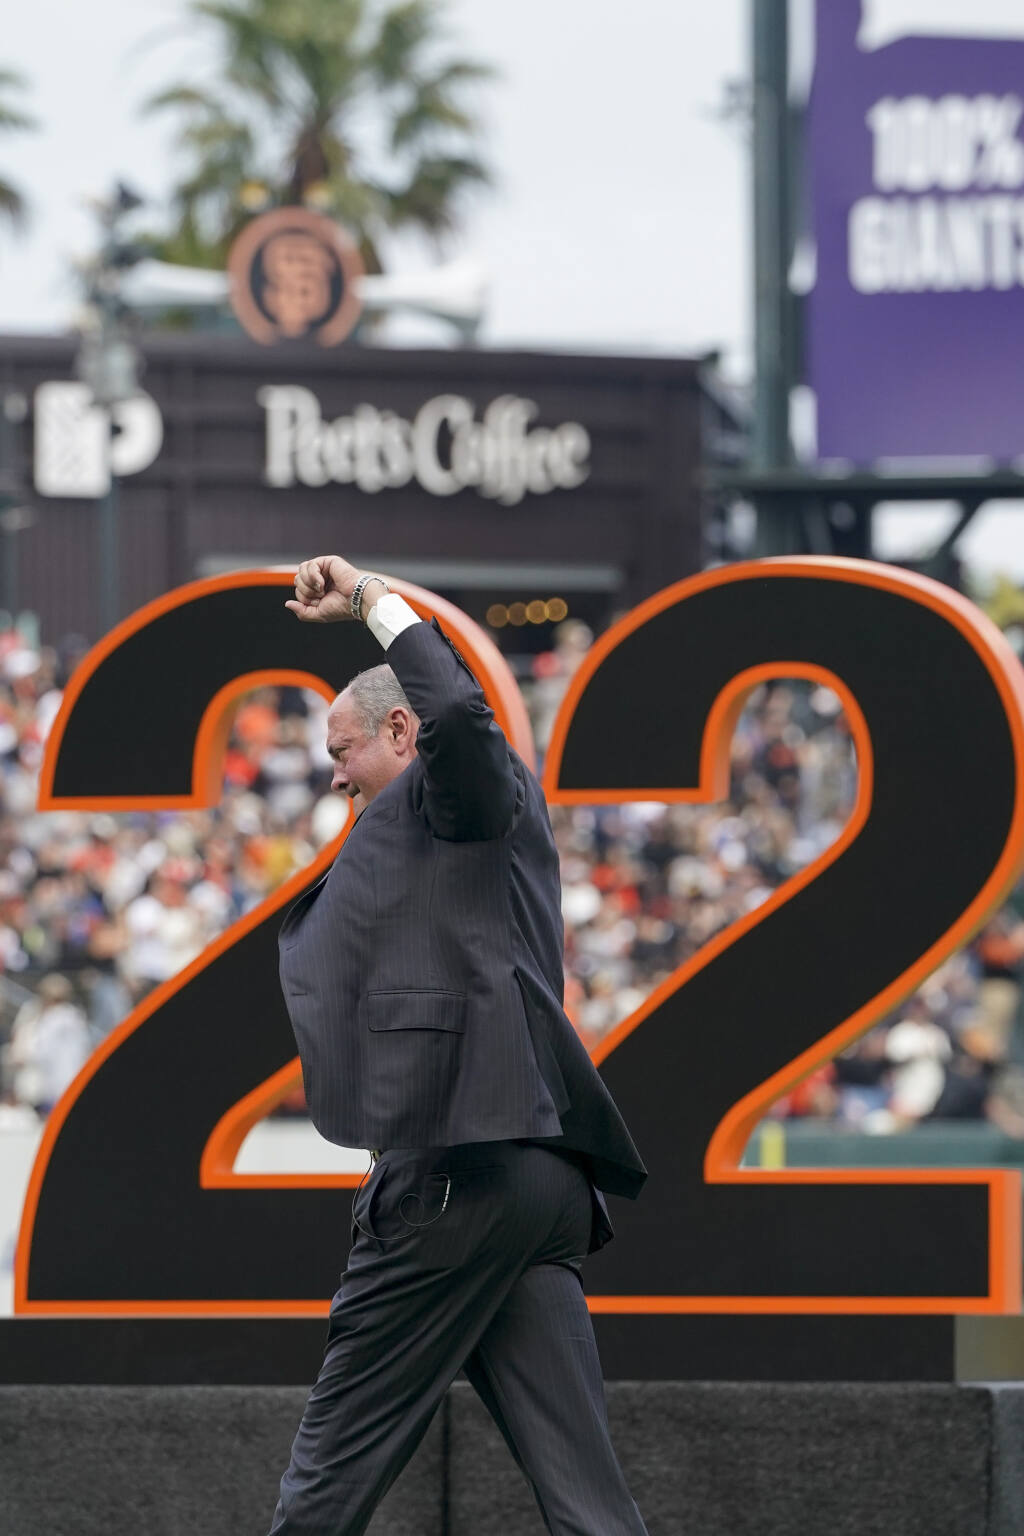 SF Giants to retire Will Clark's number 22